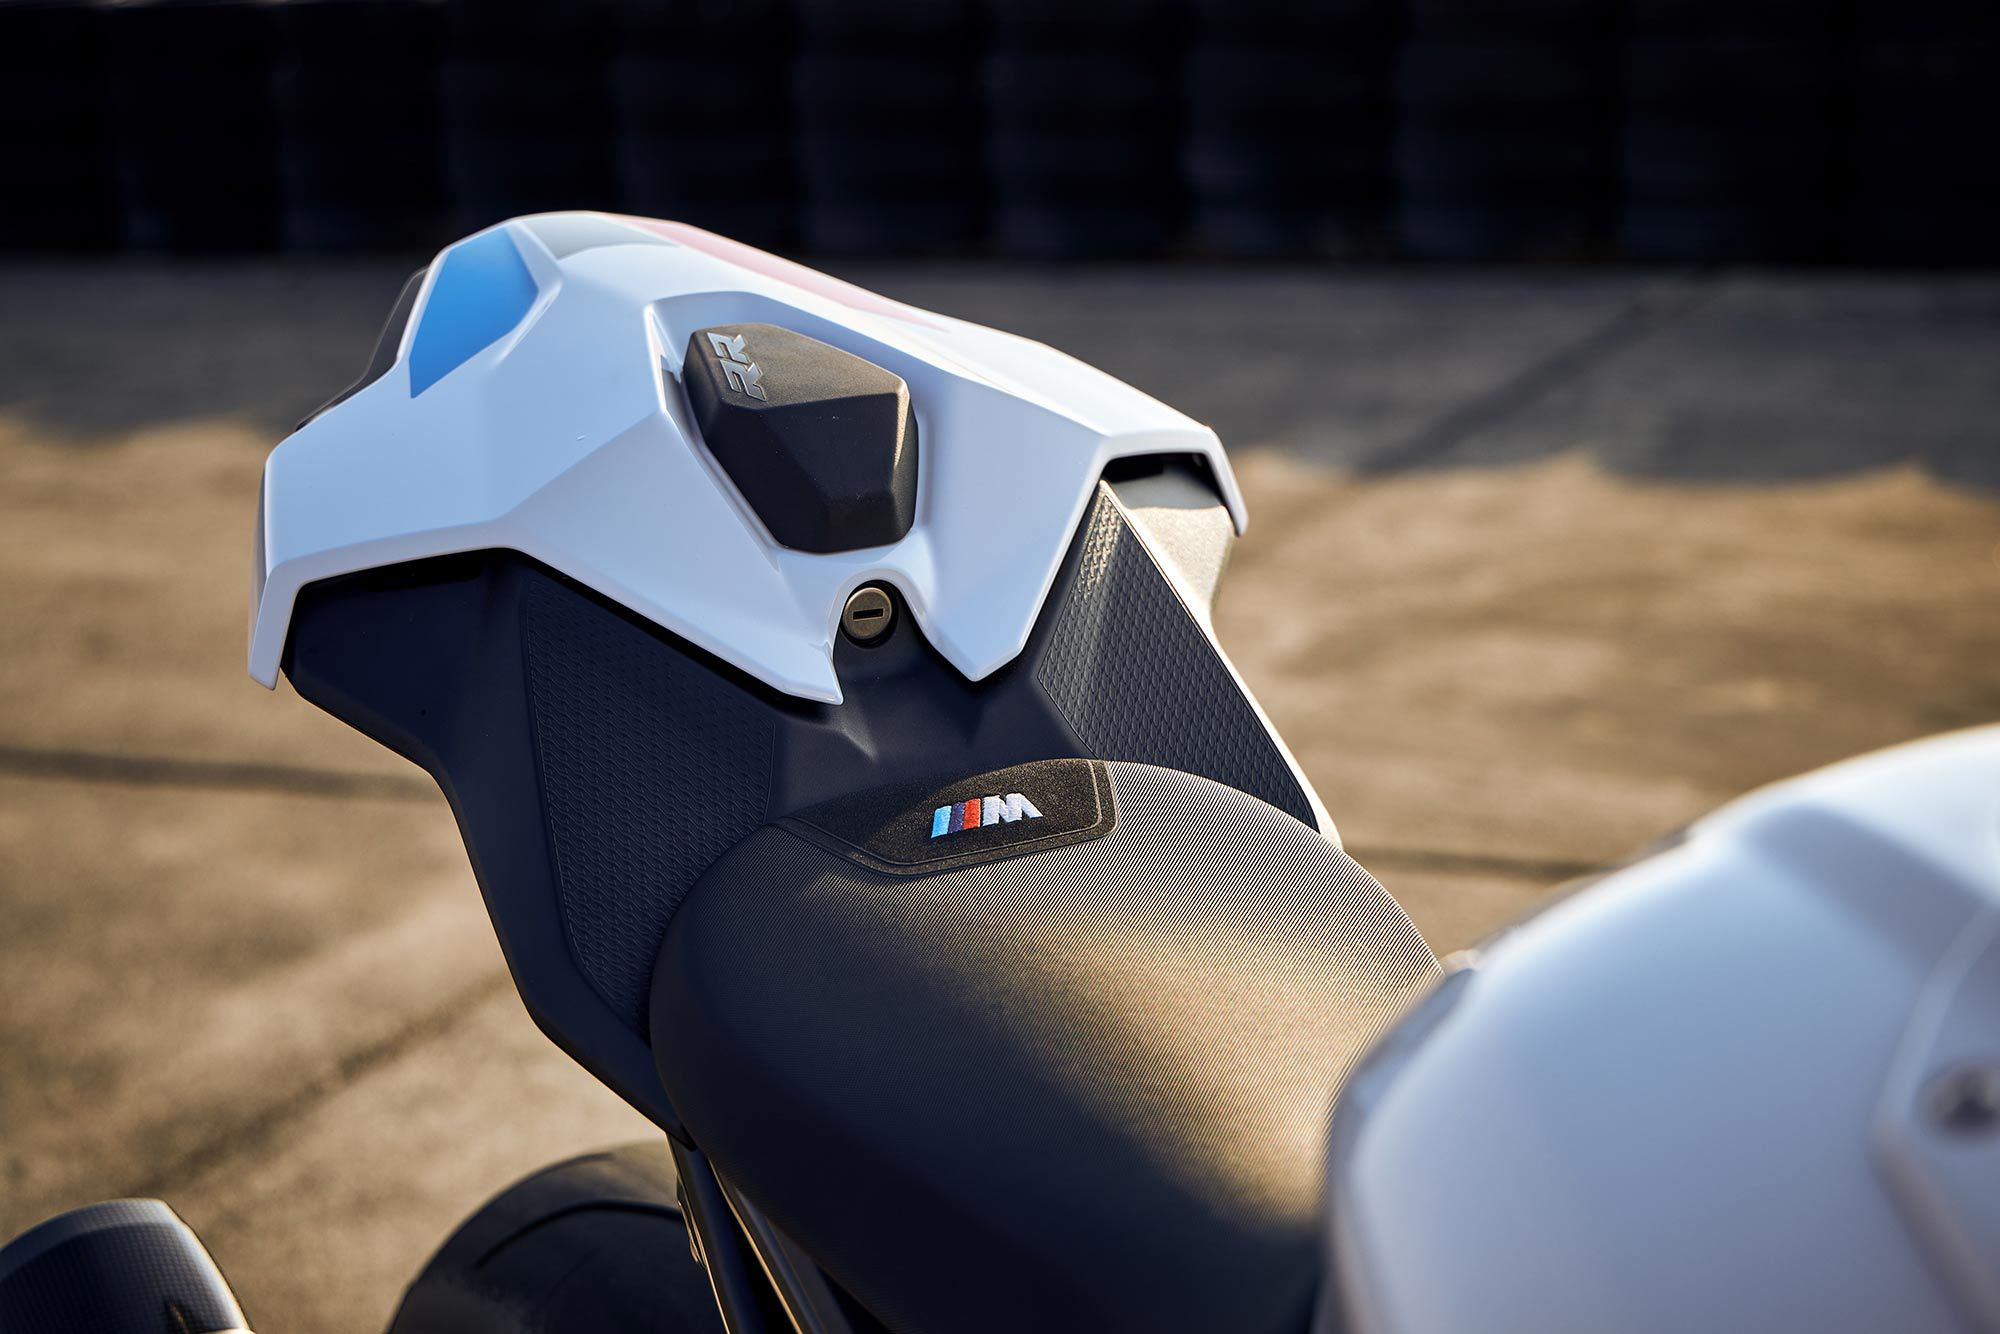 The current-generation S 1000RR’s tailsection has less bodywork than earlier models.